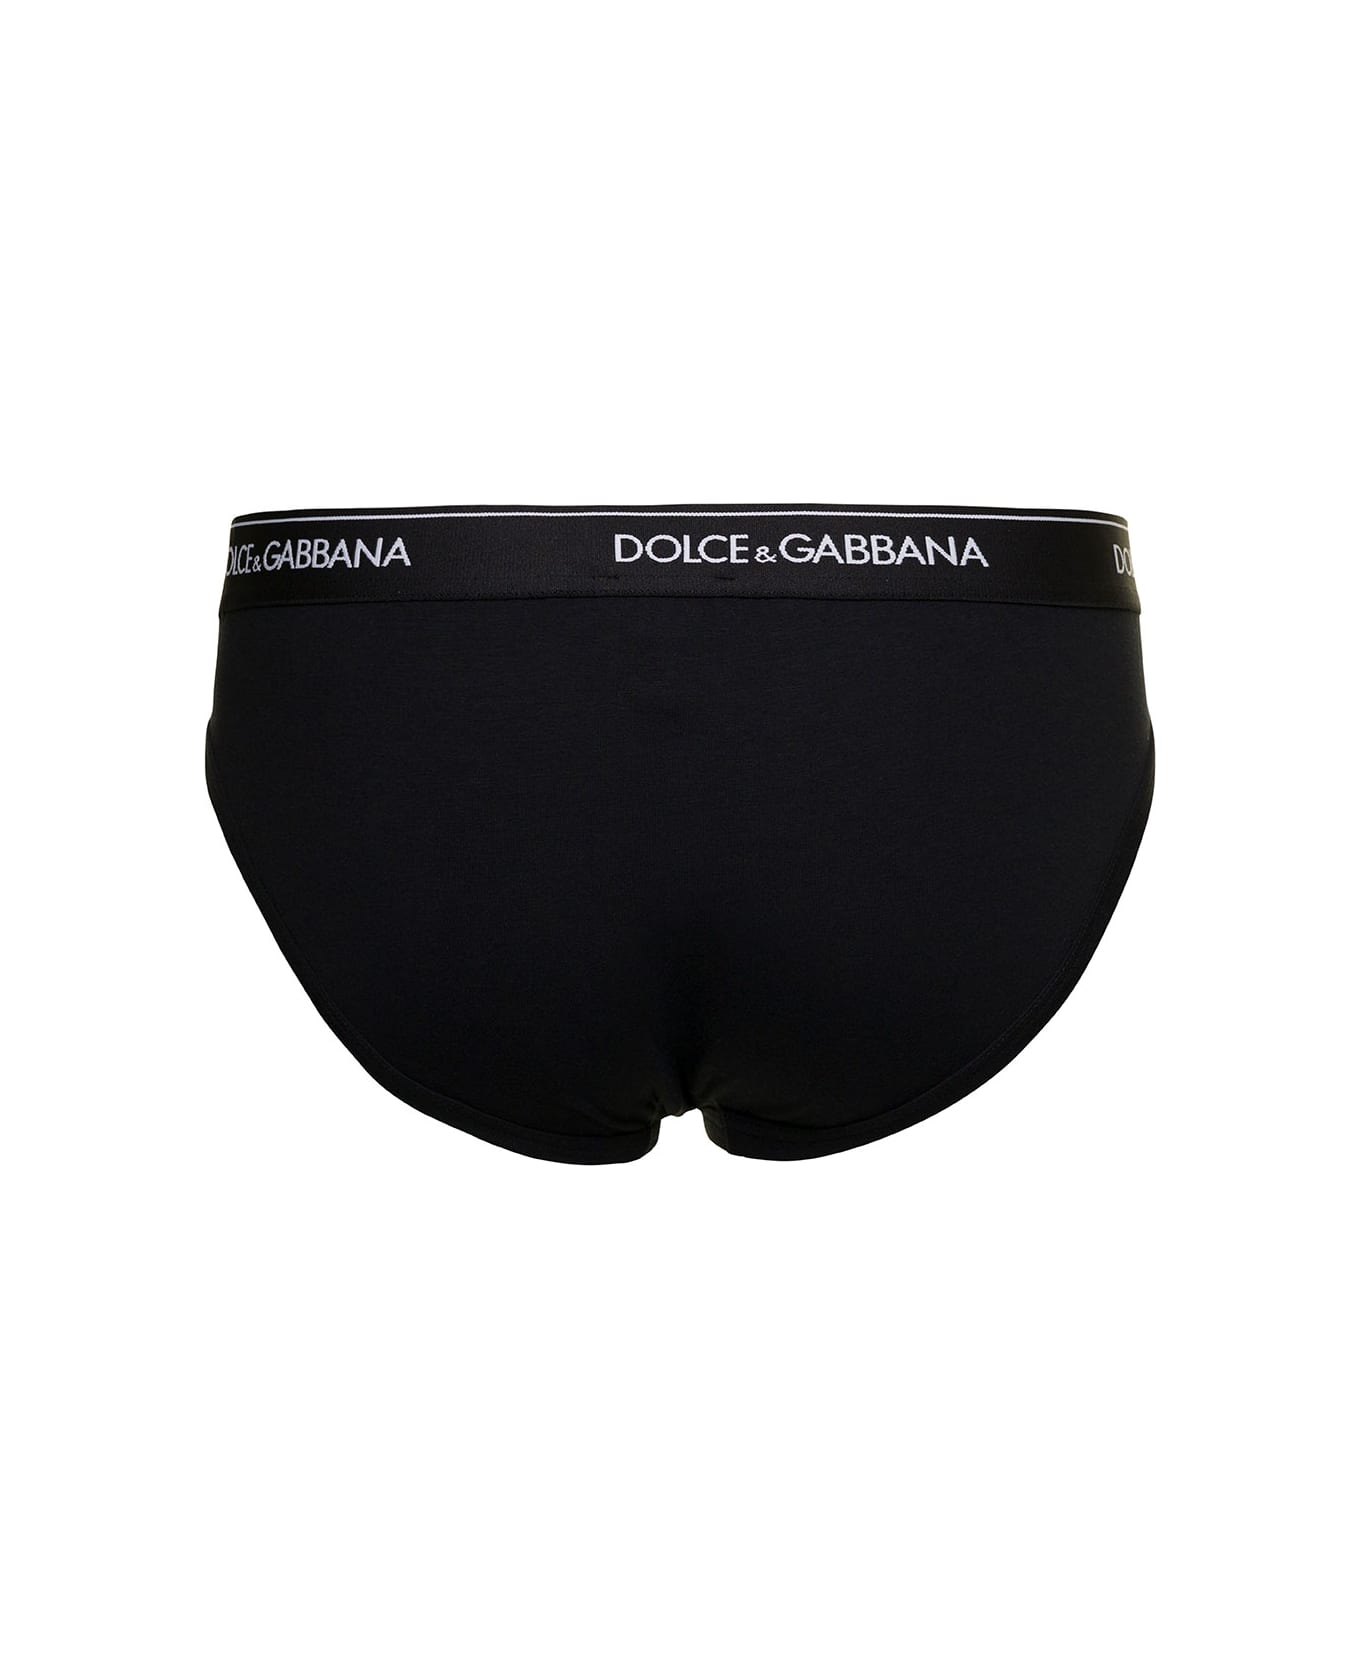 Dolce & Gabbana Cotton Briefs With Logoed Elastic Band - Black